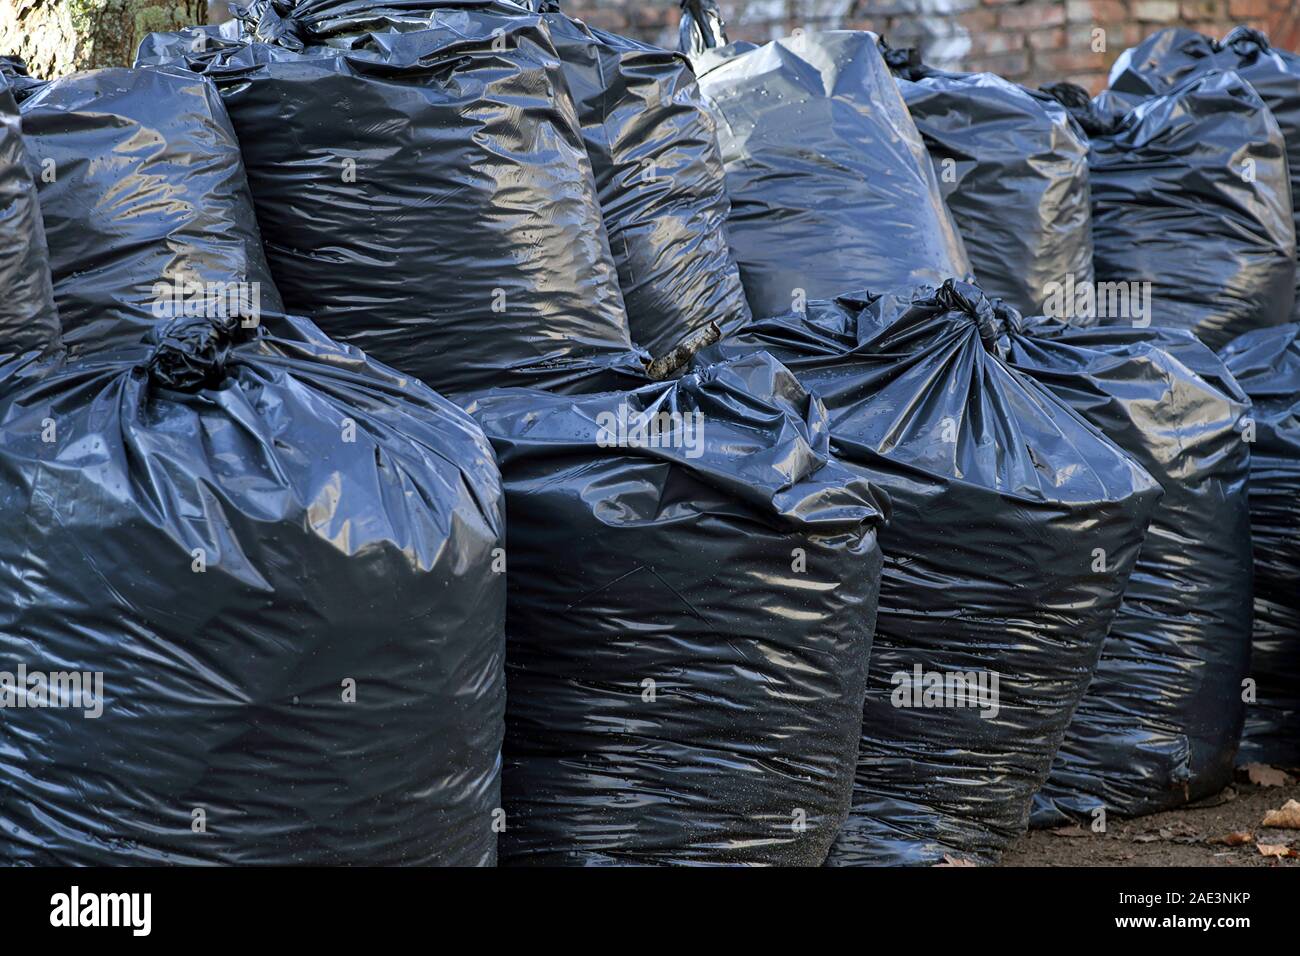 https://c8.alamy.com/comp/2AE3NKP/big-pile-of-black-plastic-garbage-bags-with-trash-stacked-on-the-street-trash-bags-on-the-street-at-utility-workers-strike-day-2AE3NKP.jpg